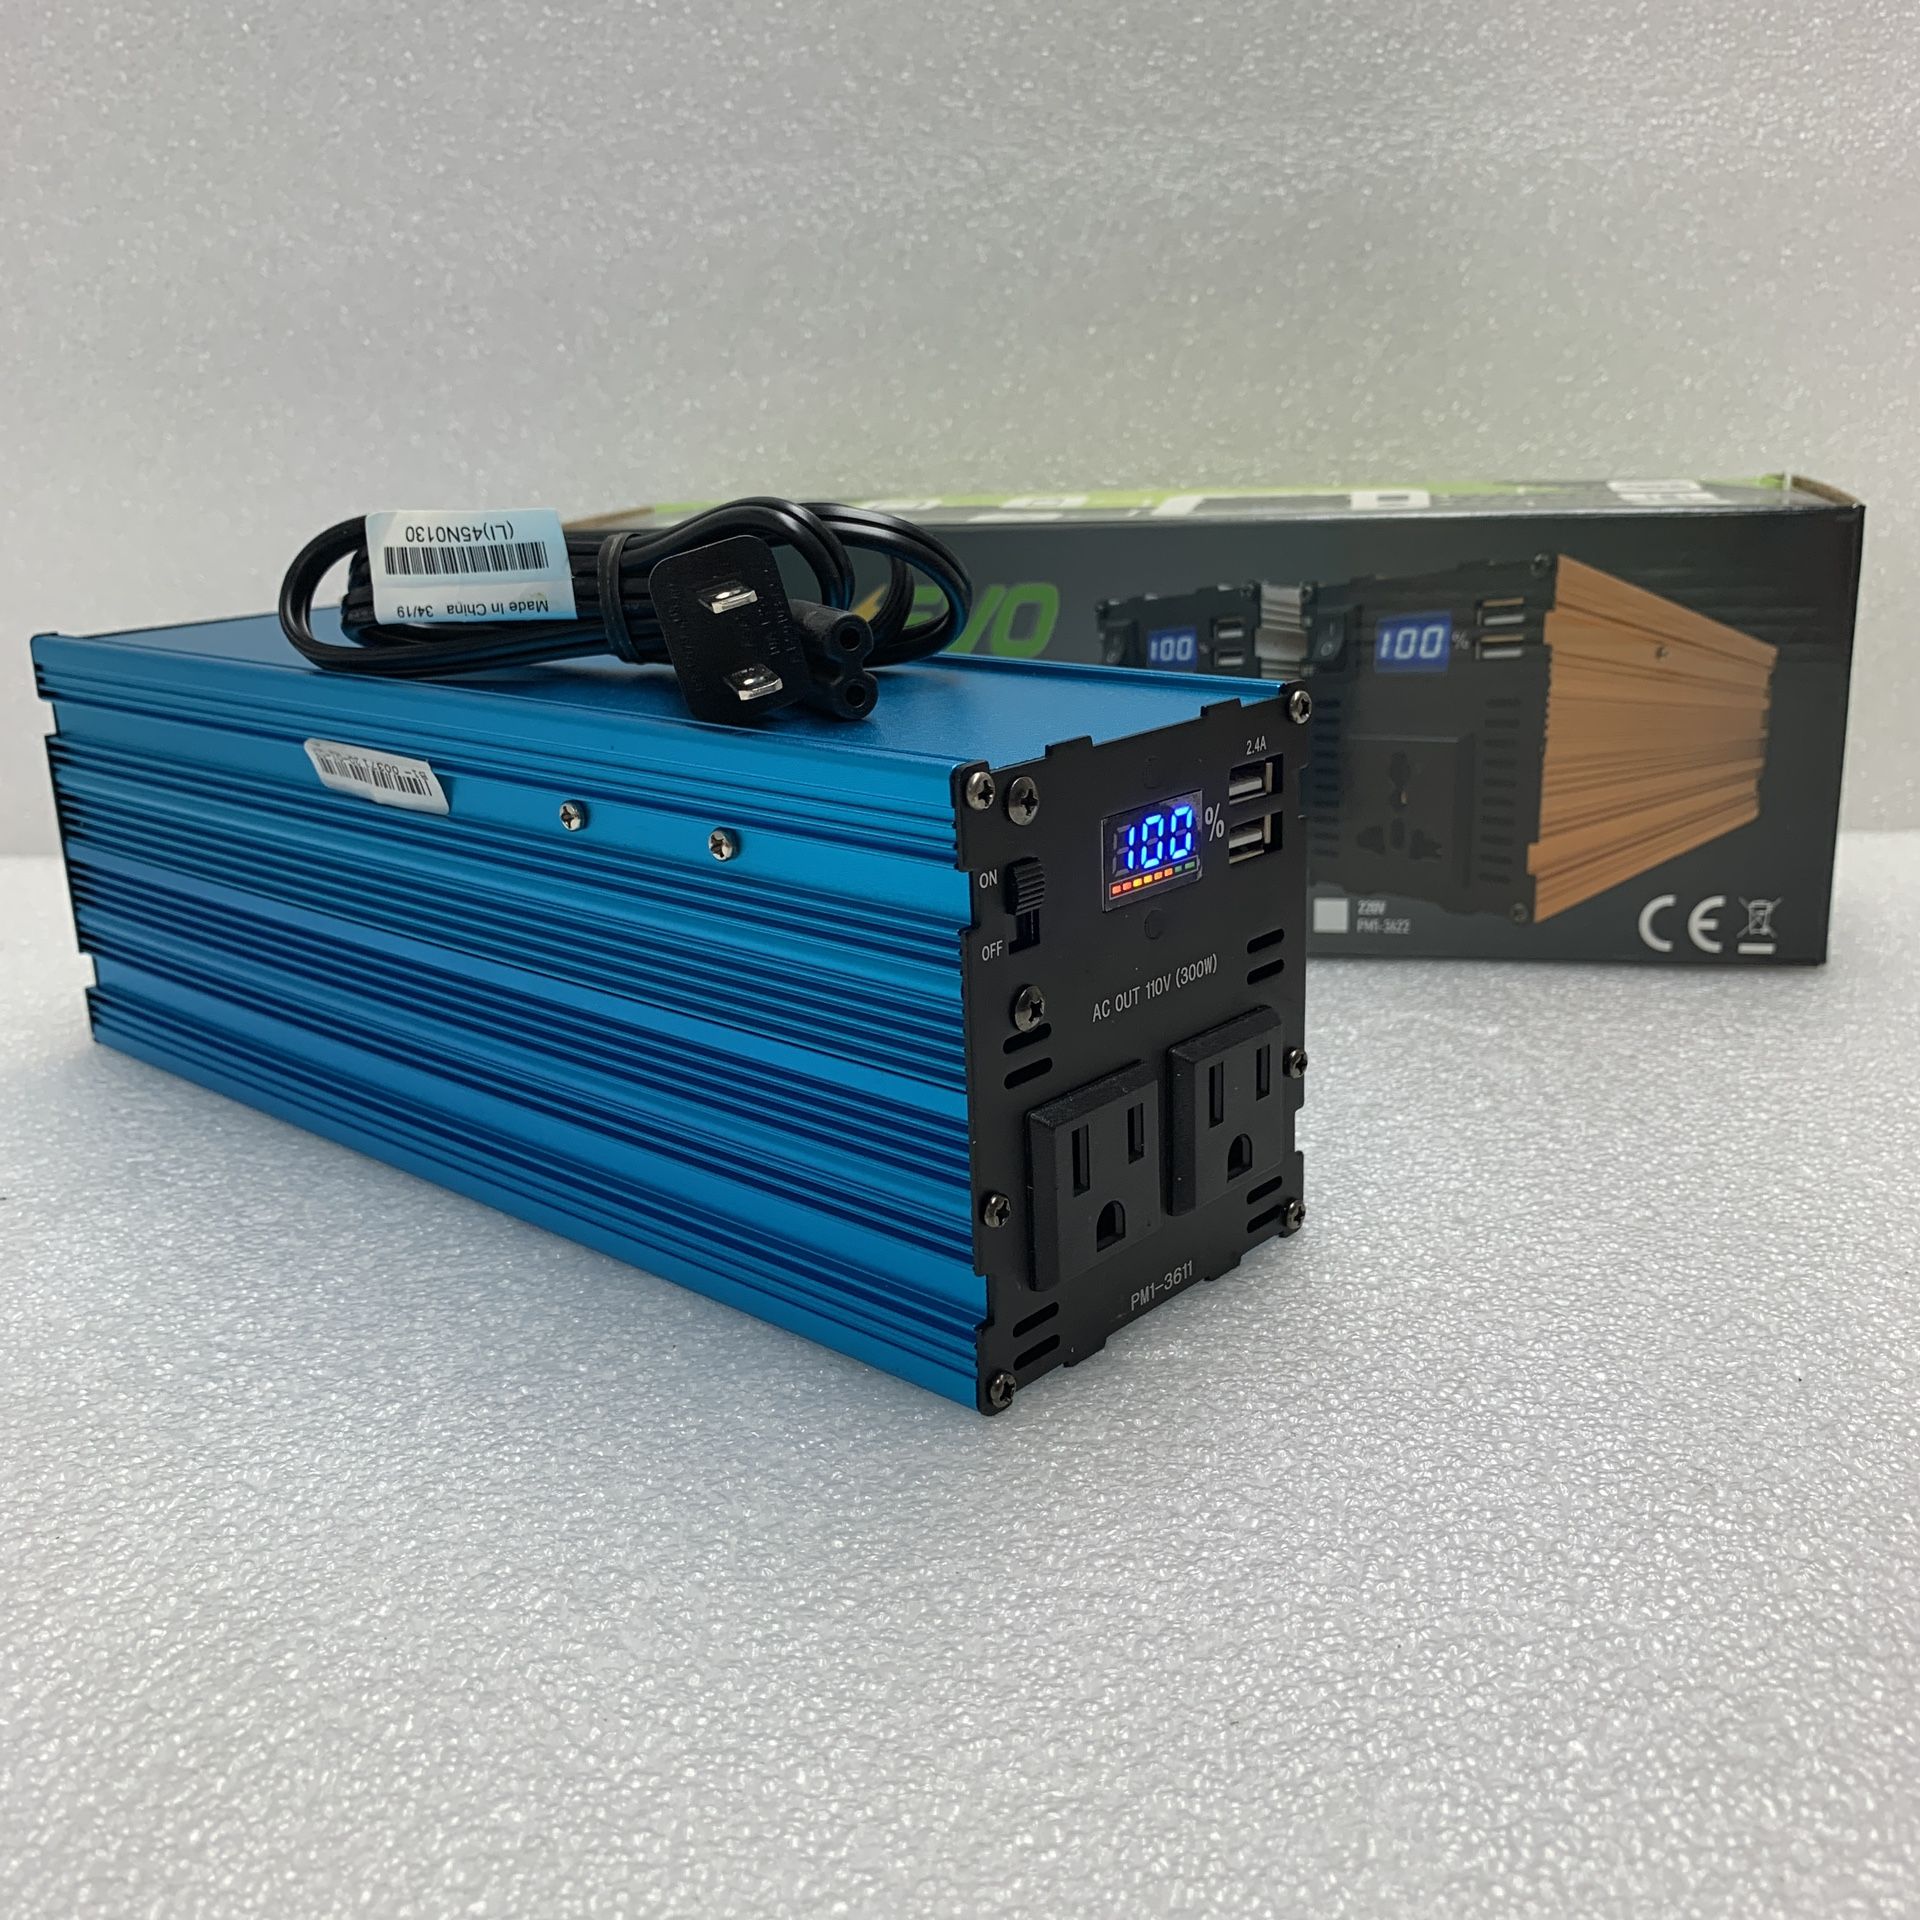 Limited Blue Brand New Camping Portable Power Station Emergency Home Use UPS Power RV Power 110V 300W Lithium two standard 110V AC outlets, dual USB